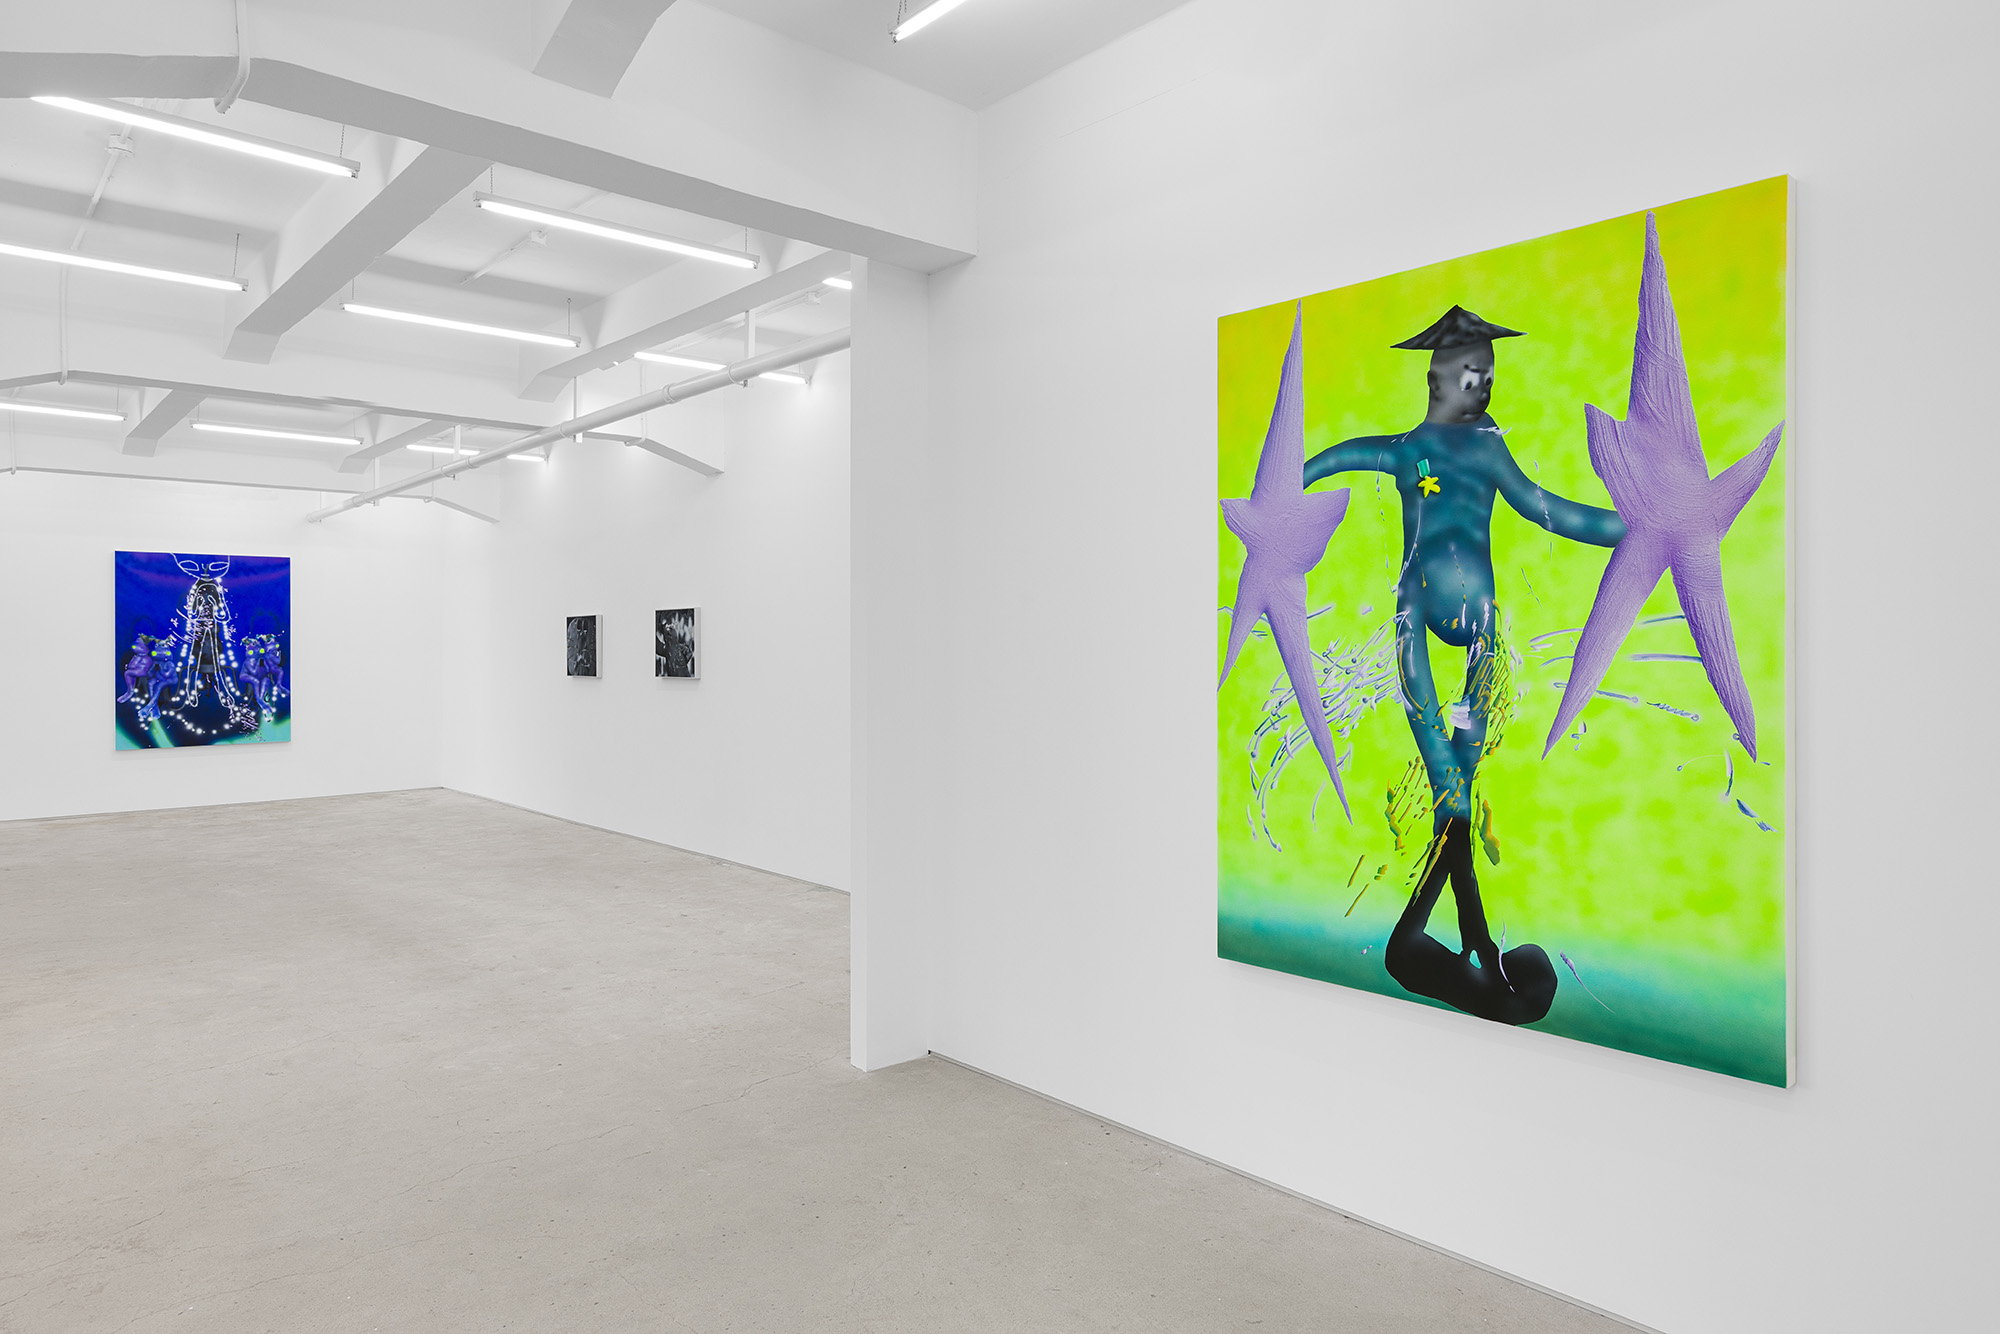 Installation view of group exhibition, Vacation II, at Gallery Vacancy, featuring works by Rao Weiyi.